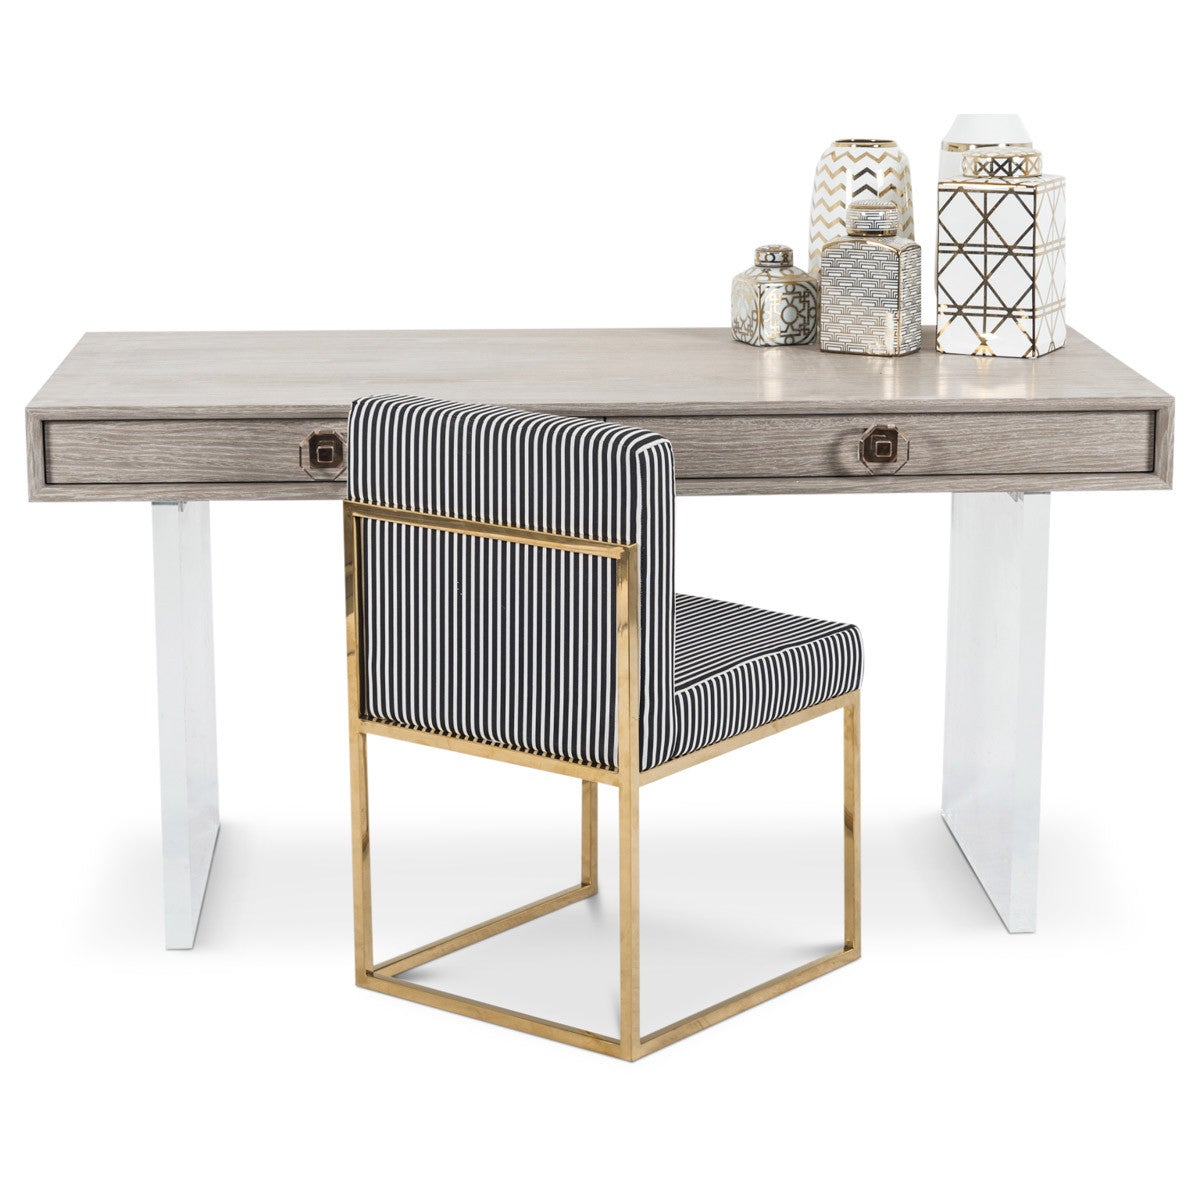 Slim two-drawer desk with a gray aged wood finish and solid white sides behind a desk chair with a polished brass base and black and white striped upholstery.